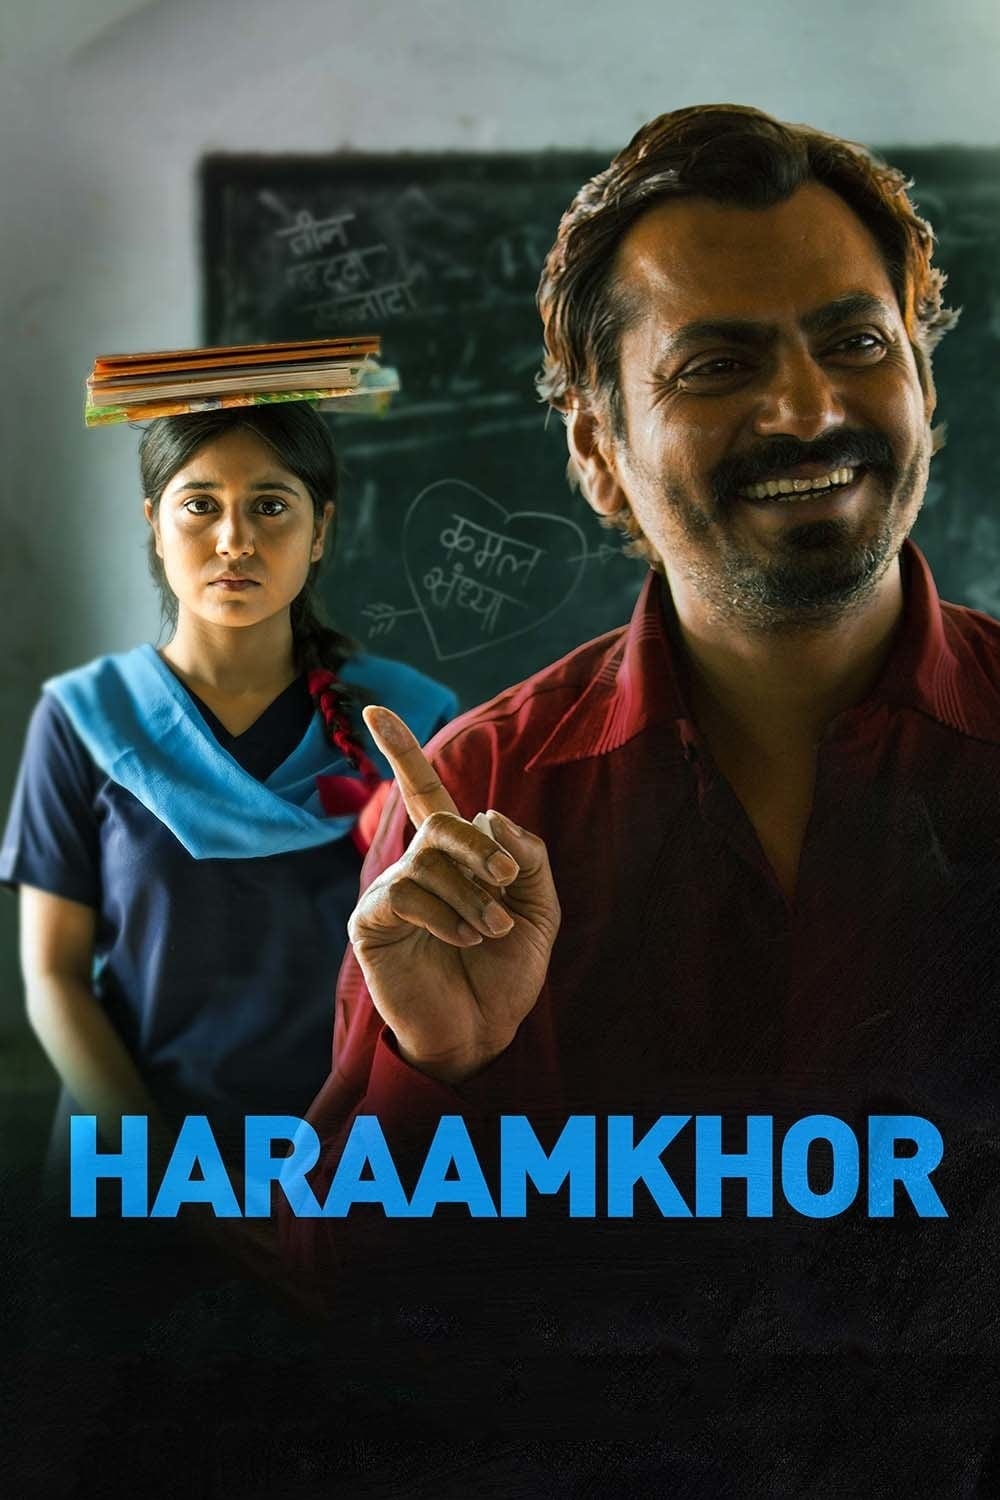 Poster for the movie "Haraamkhor"